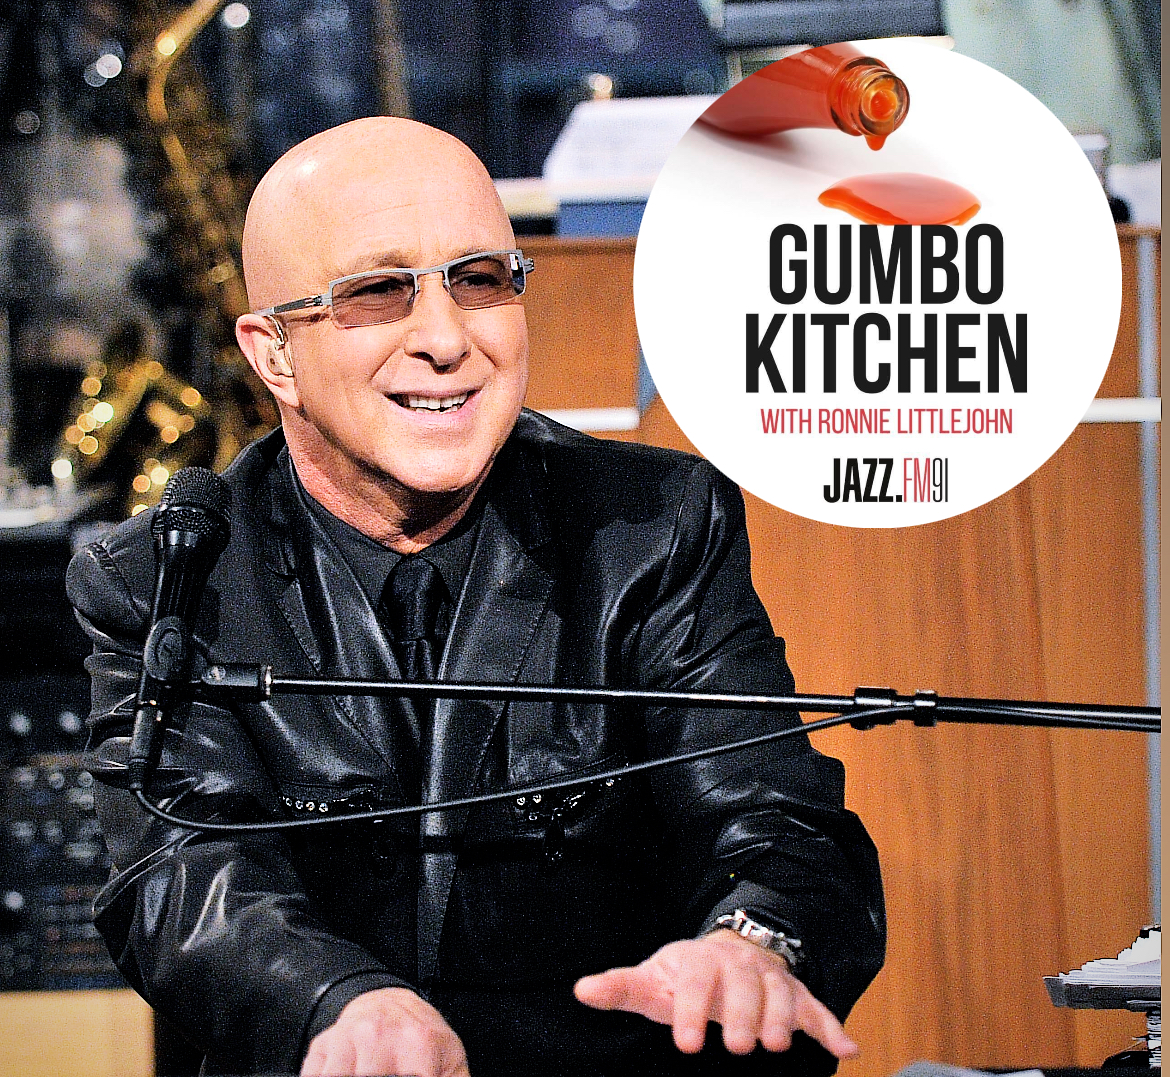 THIS FRIDAY! The legendary @paulshaffer will join Ronnie Littlejohn in the Gumbo Kitchen Friday night at 9pm. They'll talk about Paul's illustrious 50+ year career + his new projects! Tune in live on Friday night at 9pm. #jazz #discovermusic #jazzradio #jazzmusic #paulshaffer